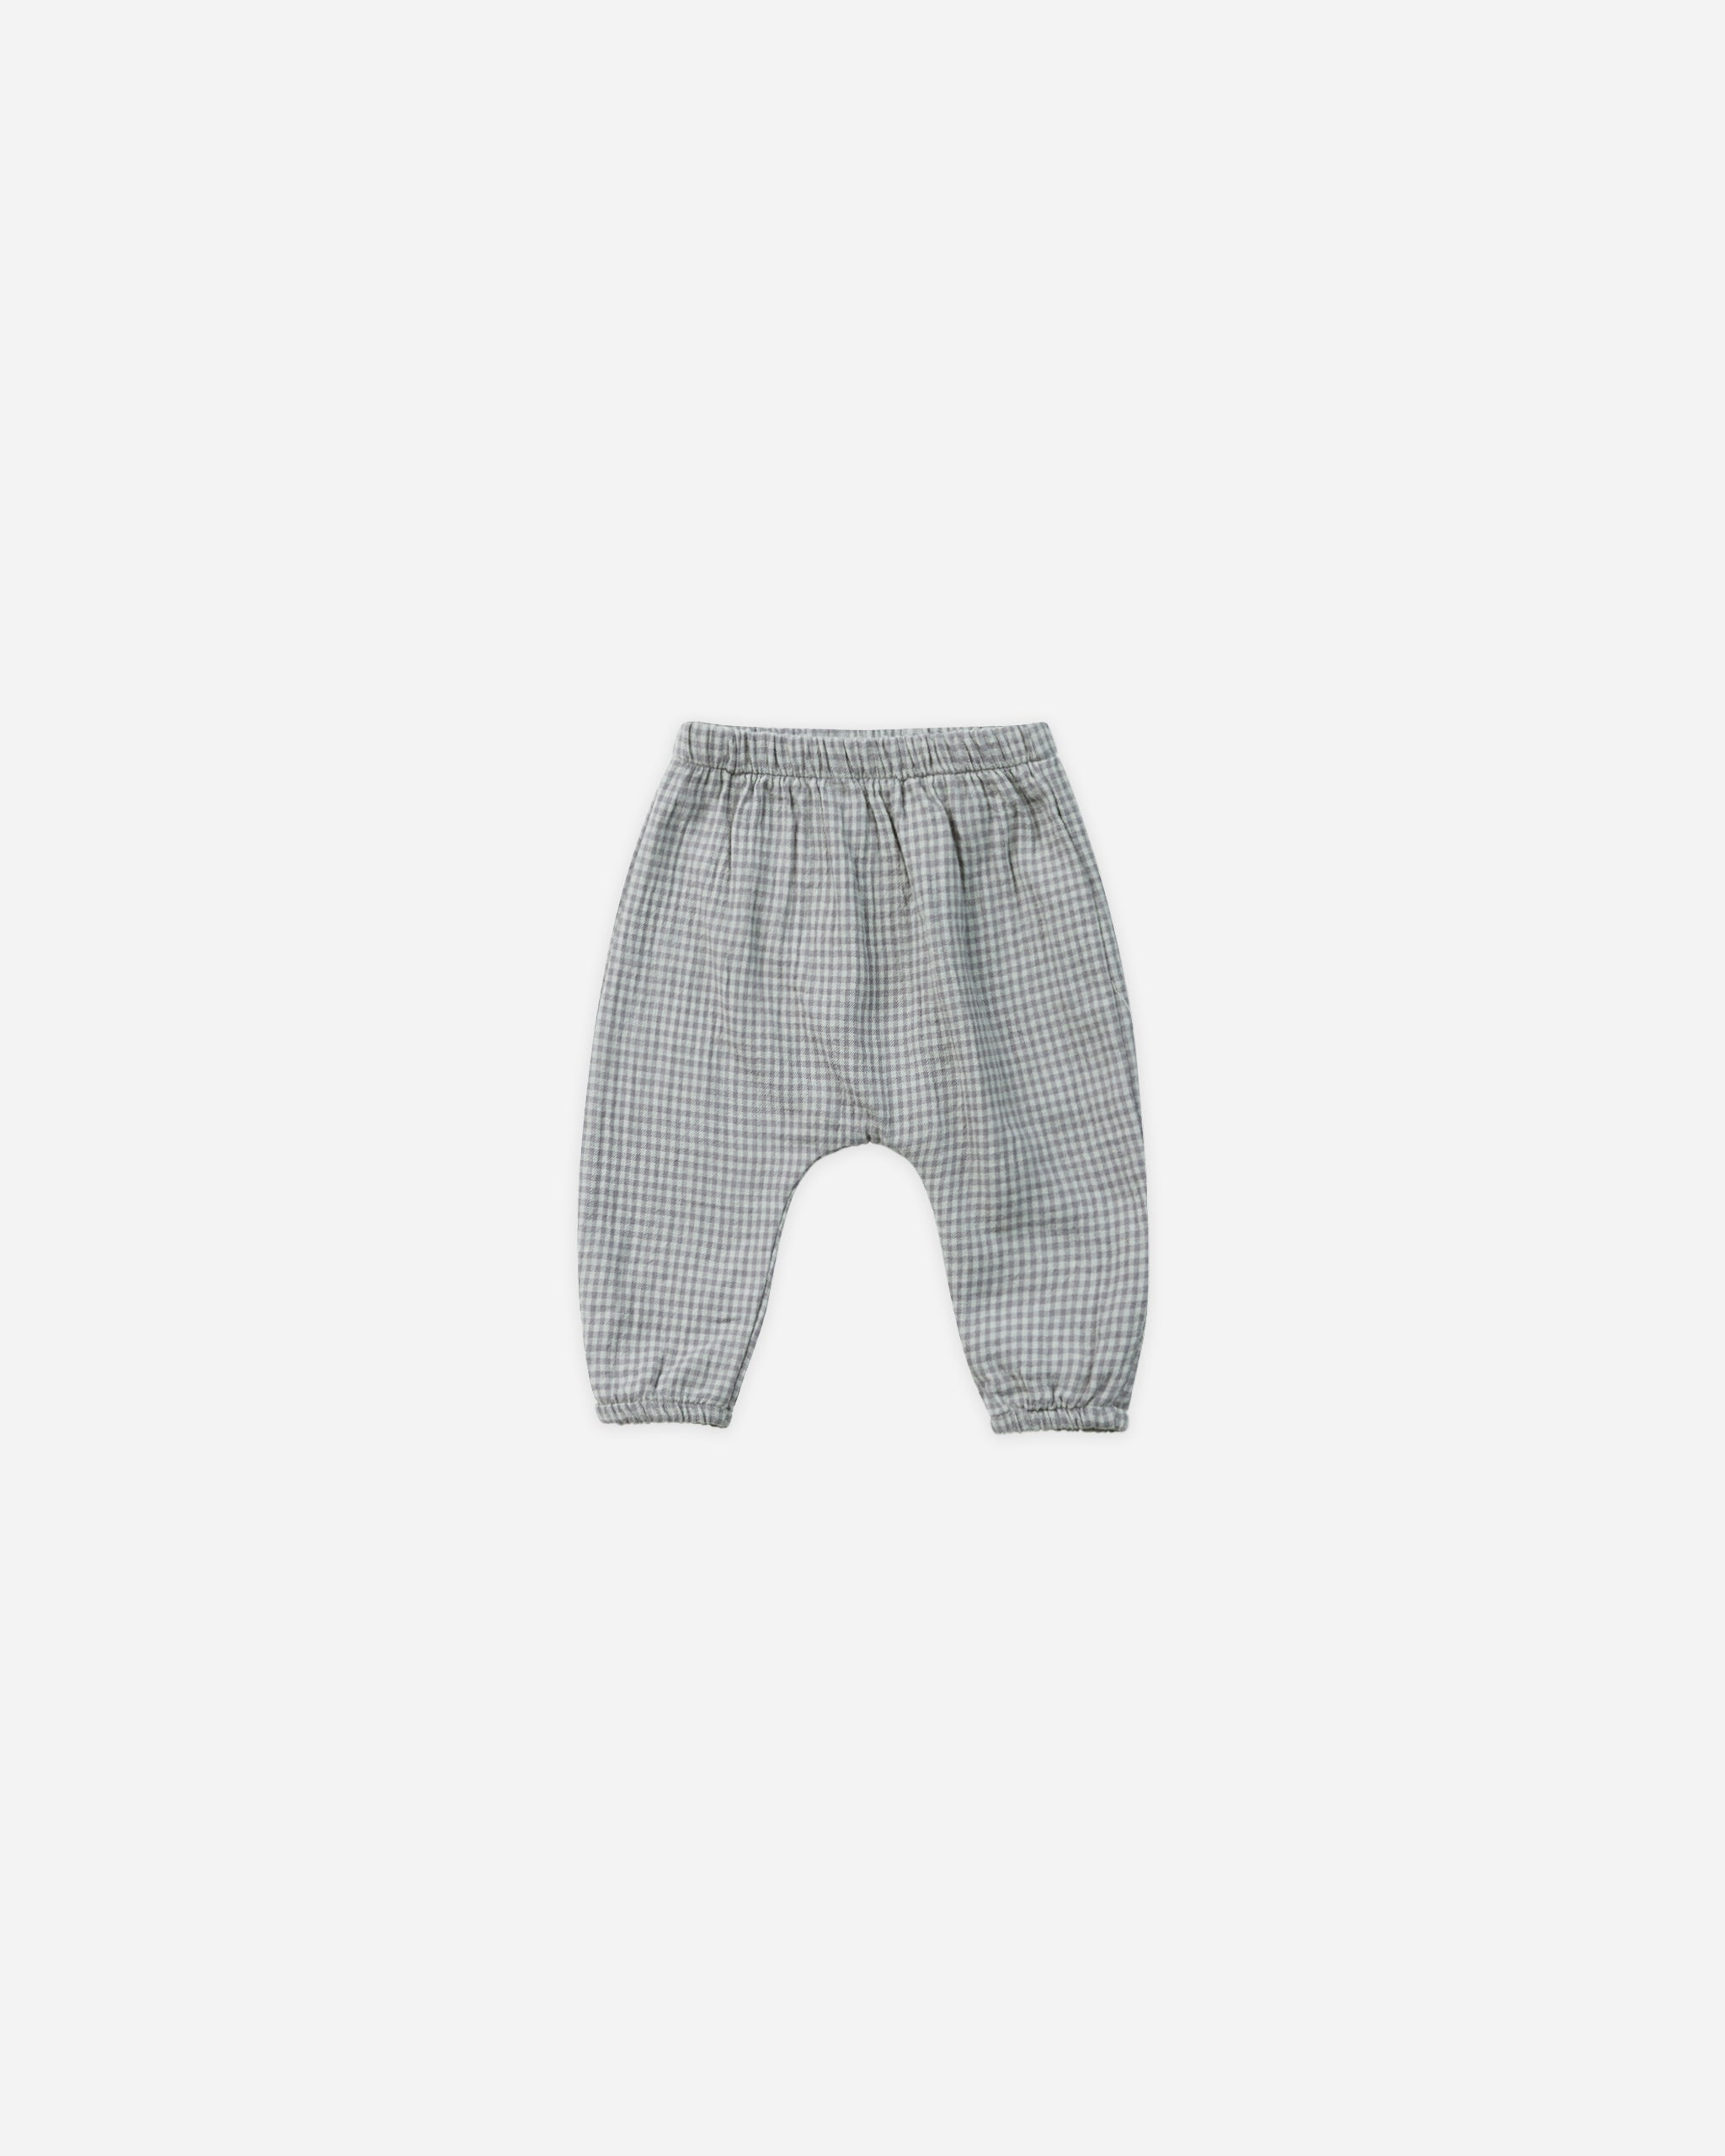 Woven Pant || Blue Gingham - Rylee + Cru | Kids Clothes | Trendy Baby Clothes | Modern Infant Outfits |